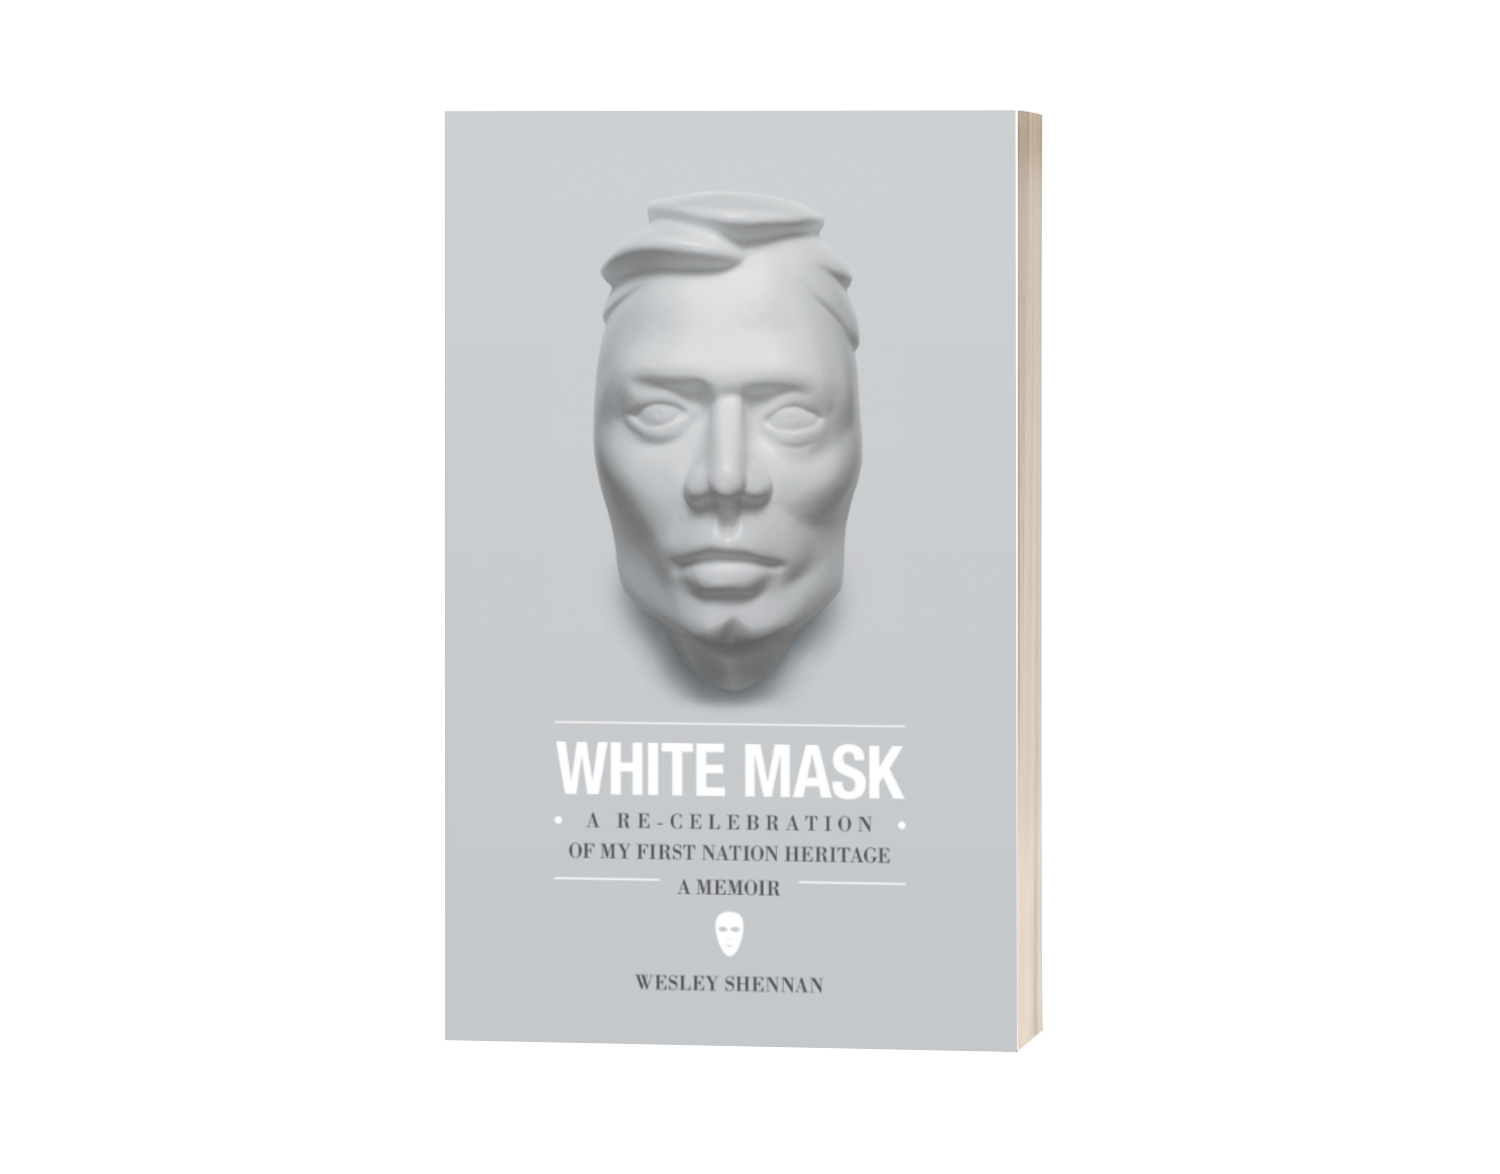 White Mask by Wesley Shennan